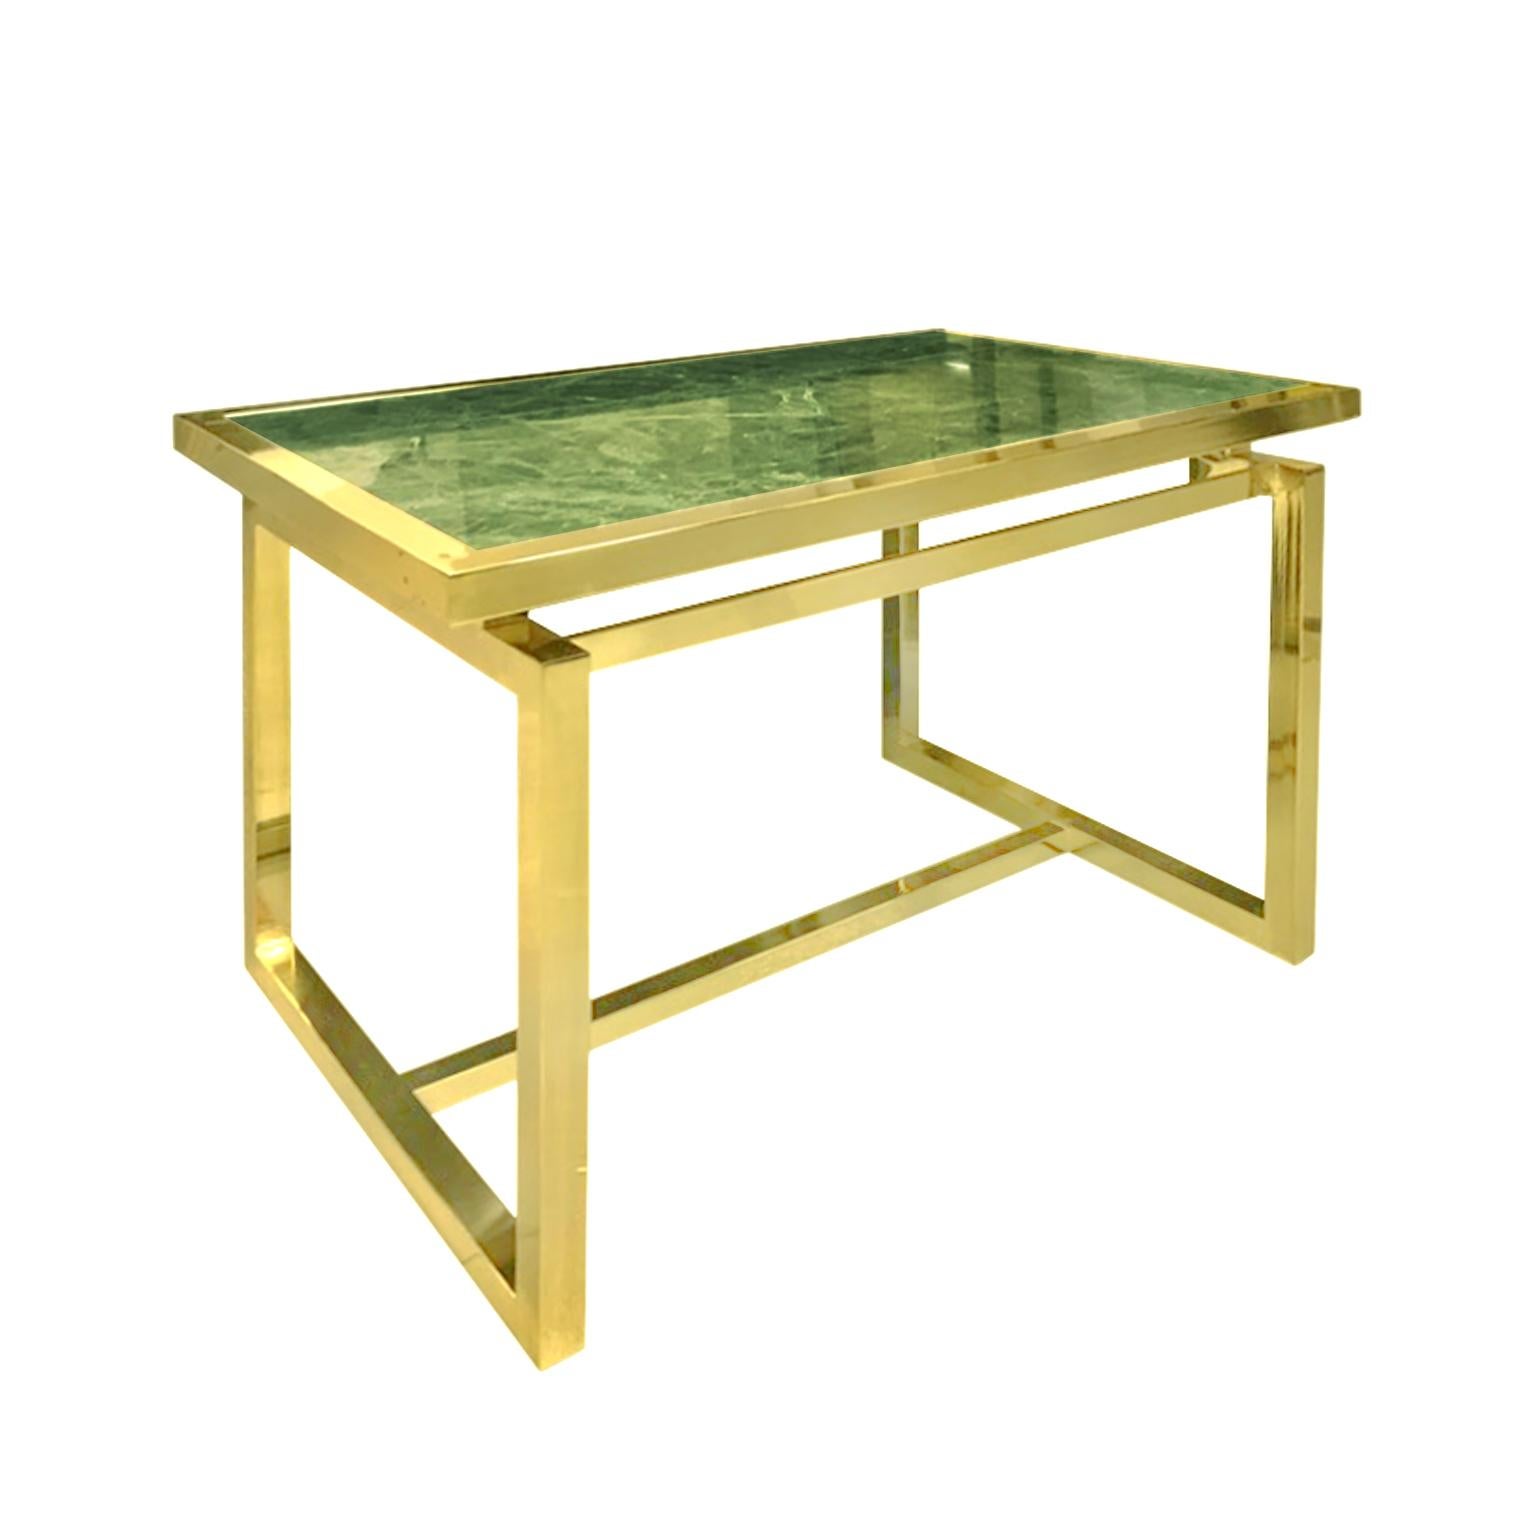 Brass desk with green marble cantilevered top. USA, 1970s.